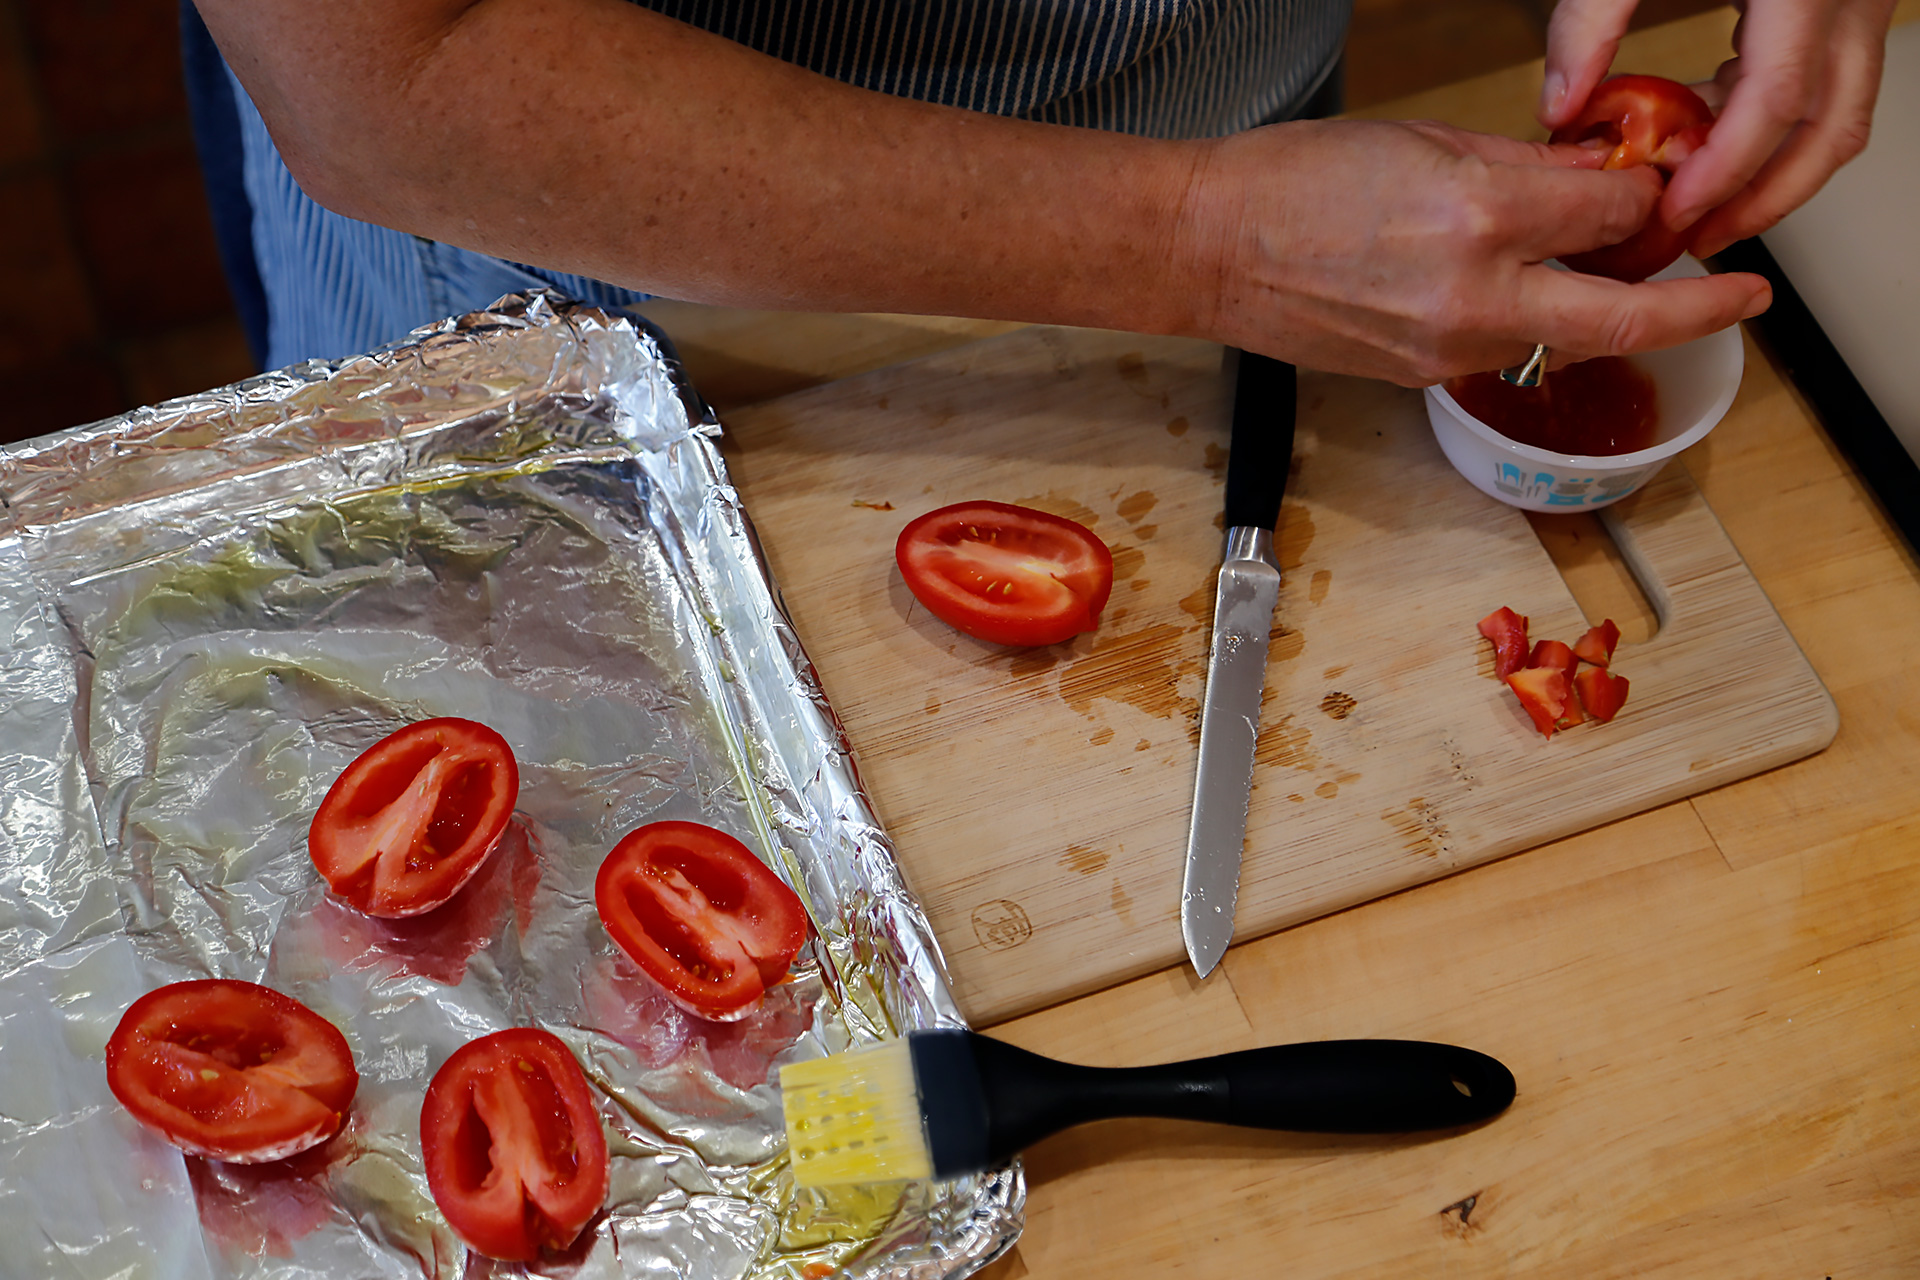 Cut the tomatoes in half lengthwise, trim away the stem end, and gently squeeze out the seeds.